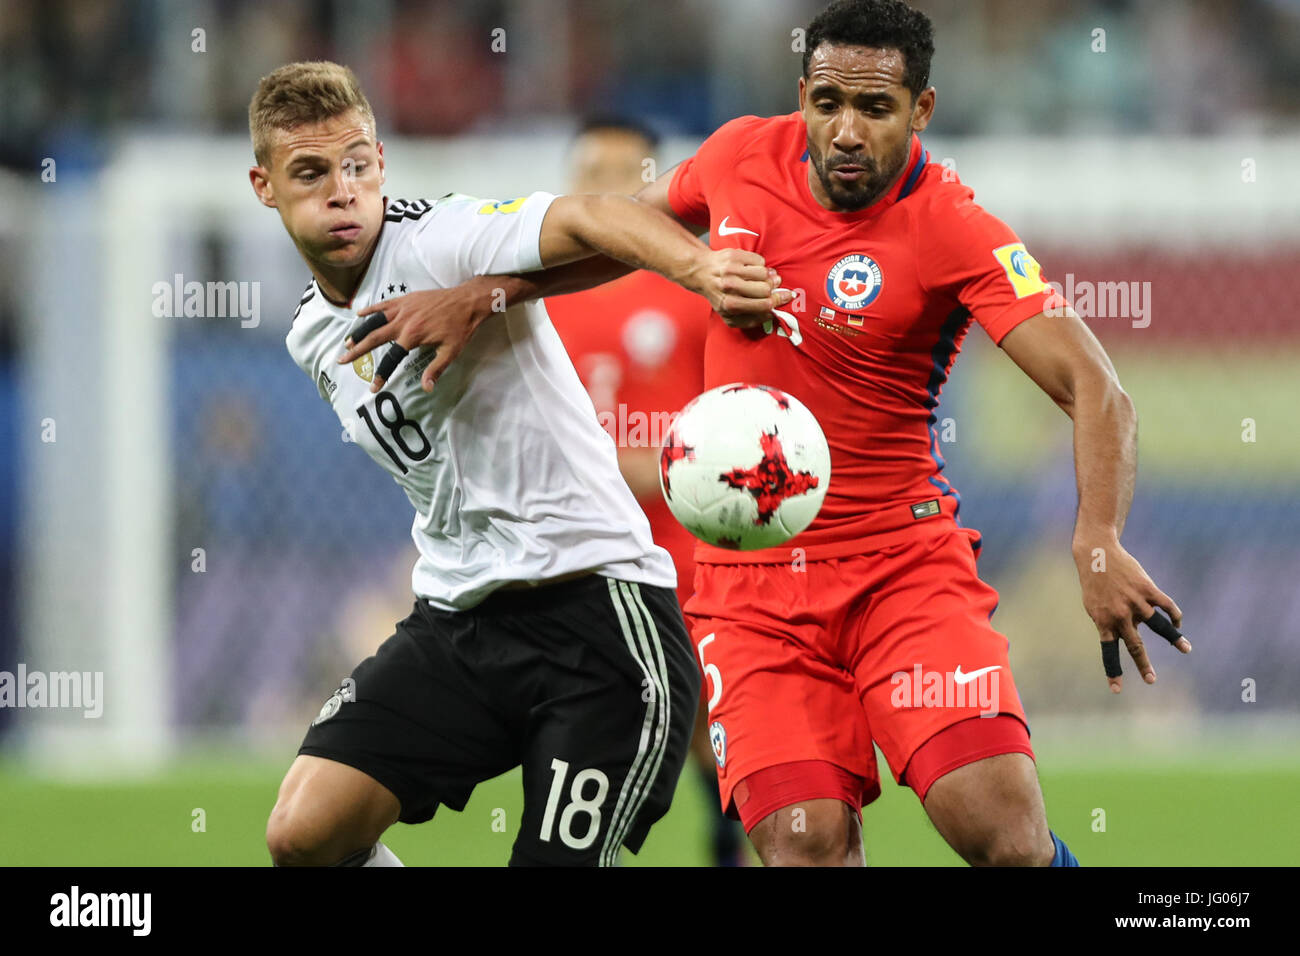 St. Petersburg, Russia. 2nd July, 2017. Joshua Kimmich (L) of Germany competes with Jean Beausejour of Chile during the final match between Chile and Germany at the 2017 FIFA Confederations Cup in St. Petersburg, Russia, on July 2, 2017. Germany claimed the title by defeating Chile with 1-0. Credit: Wu Zhuang/Xinhua/Alamy Live News Stock Photo